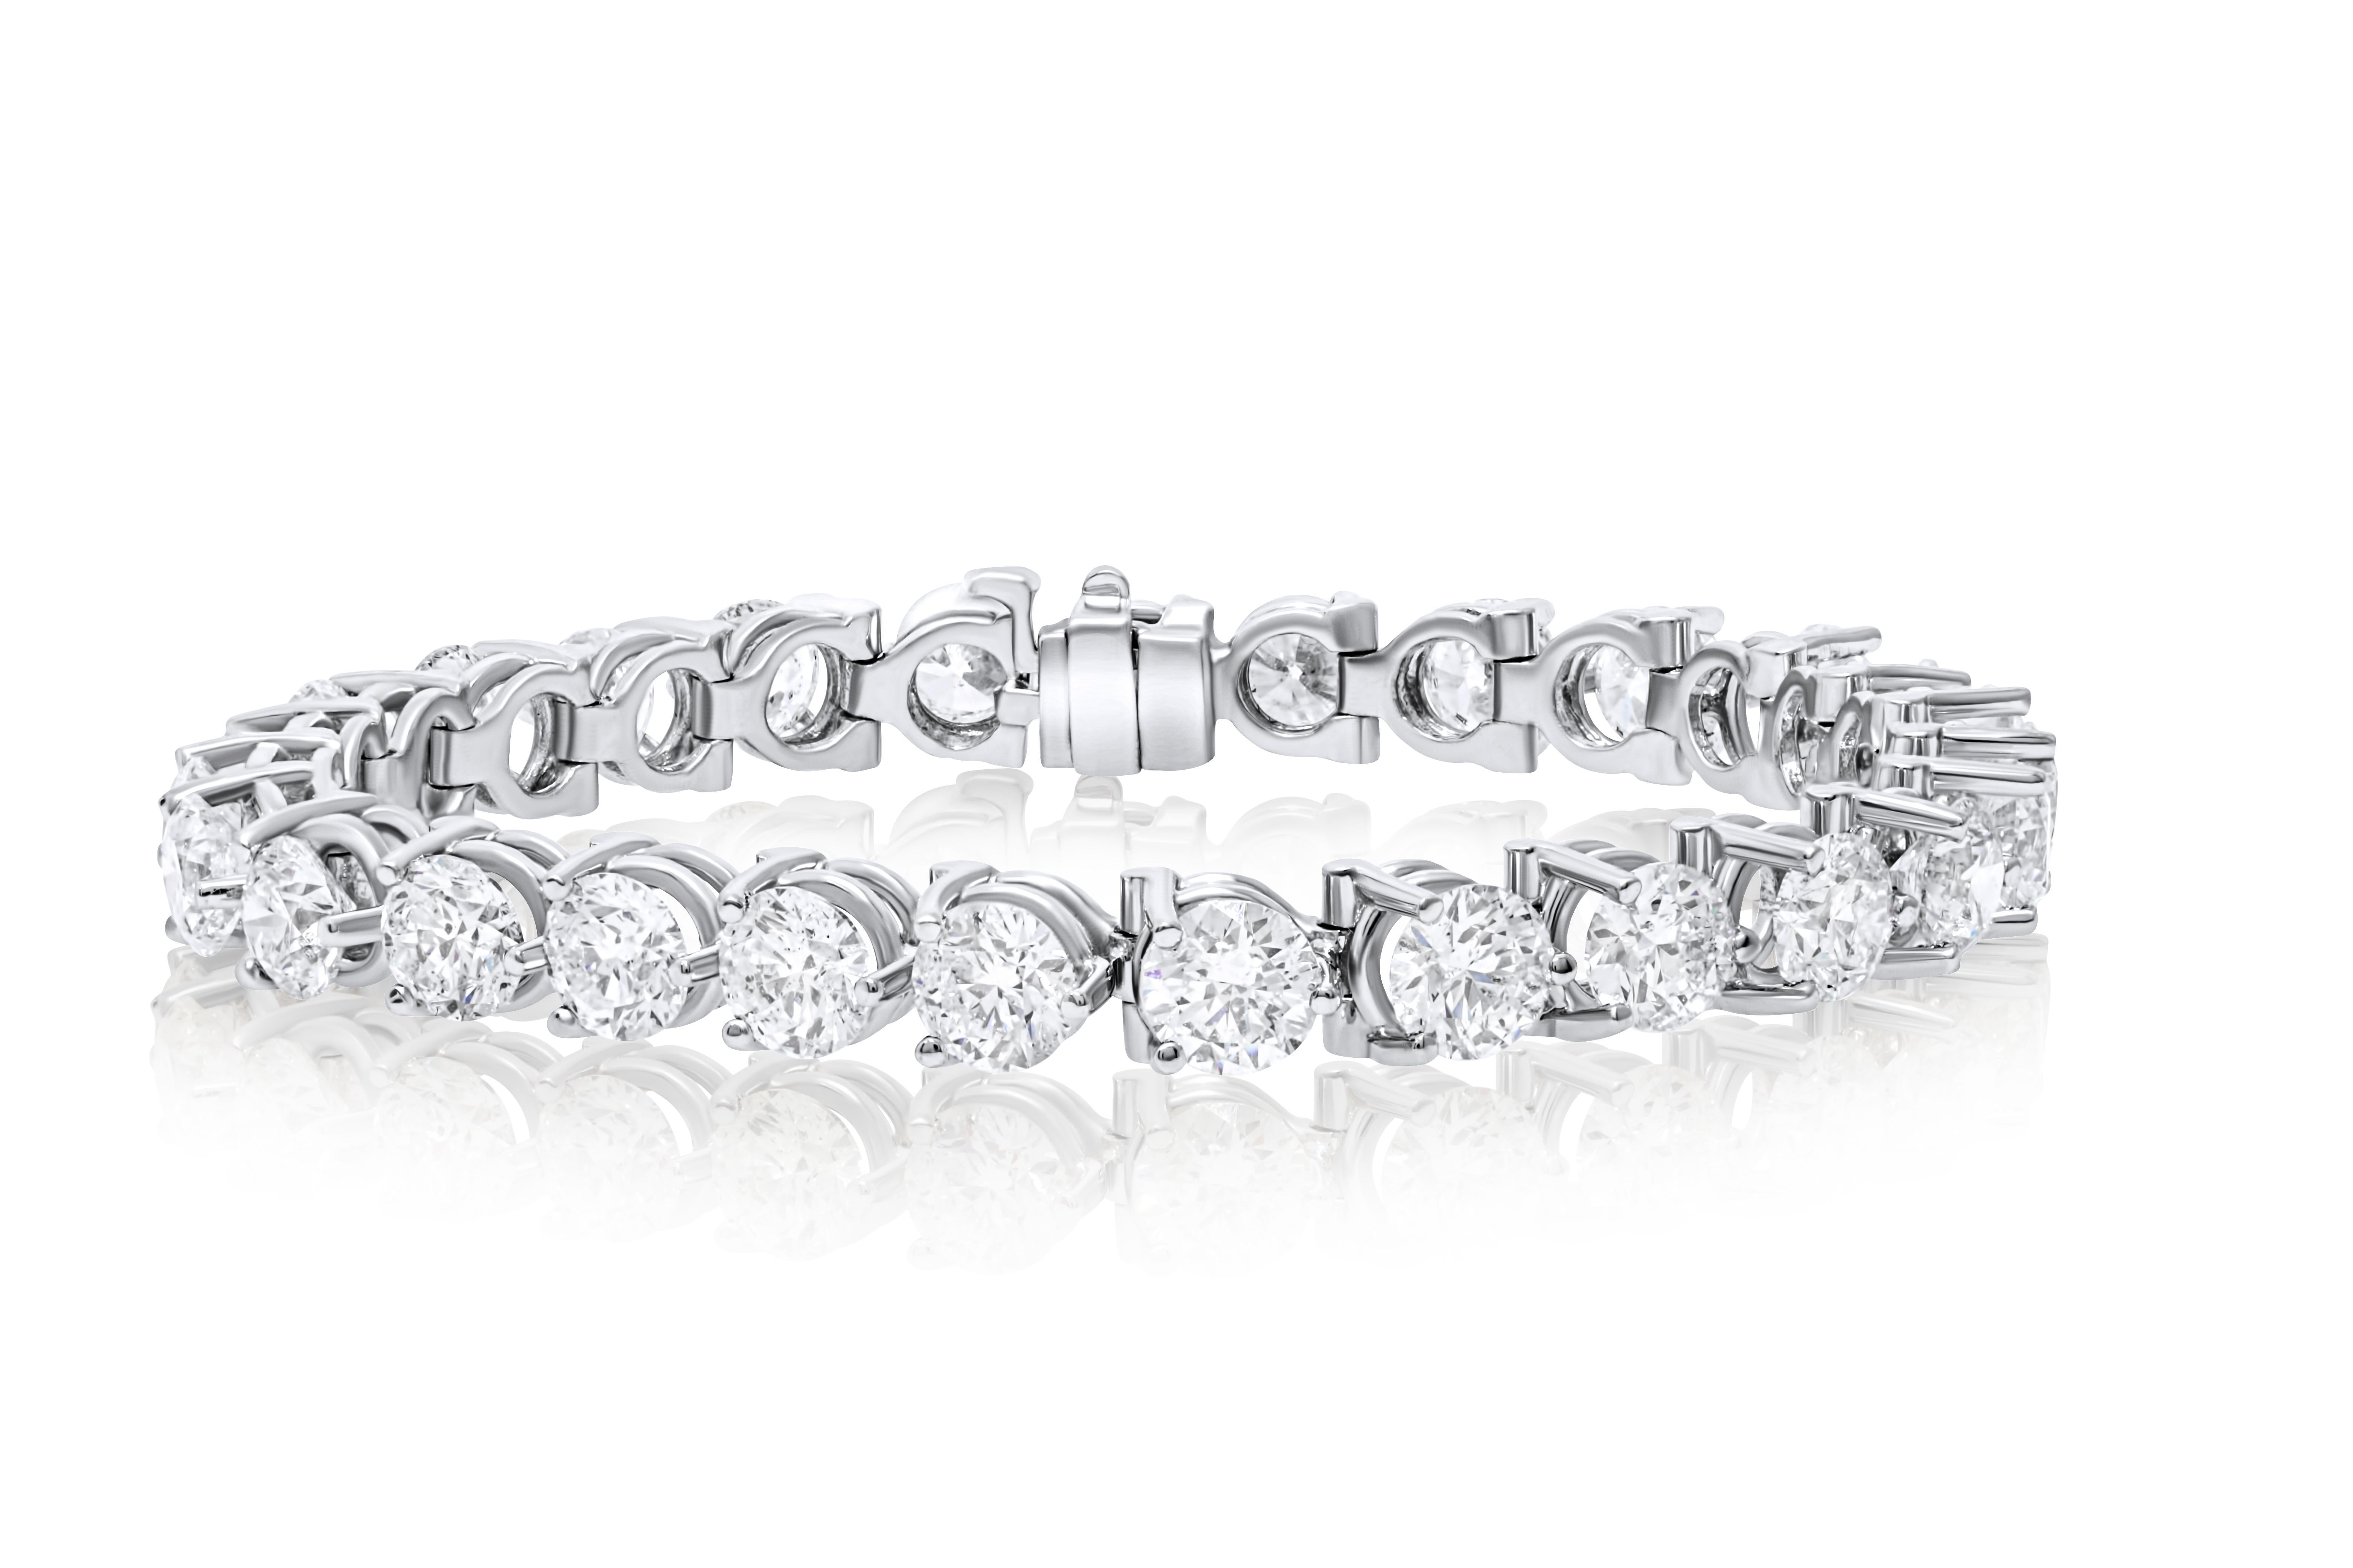 Round Cut Diana M. 18 kt white gold 3 prong diamond tennis bracelet adorned with 5.60 cts For Sale